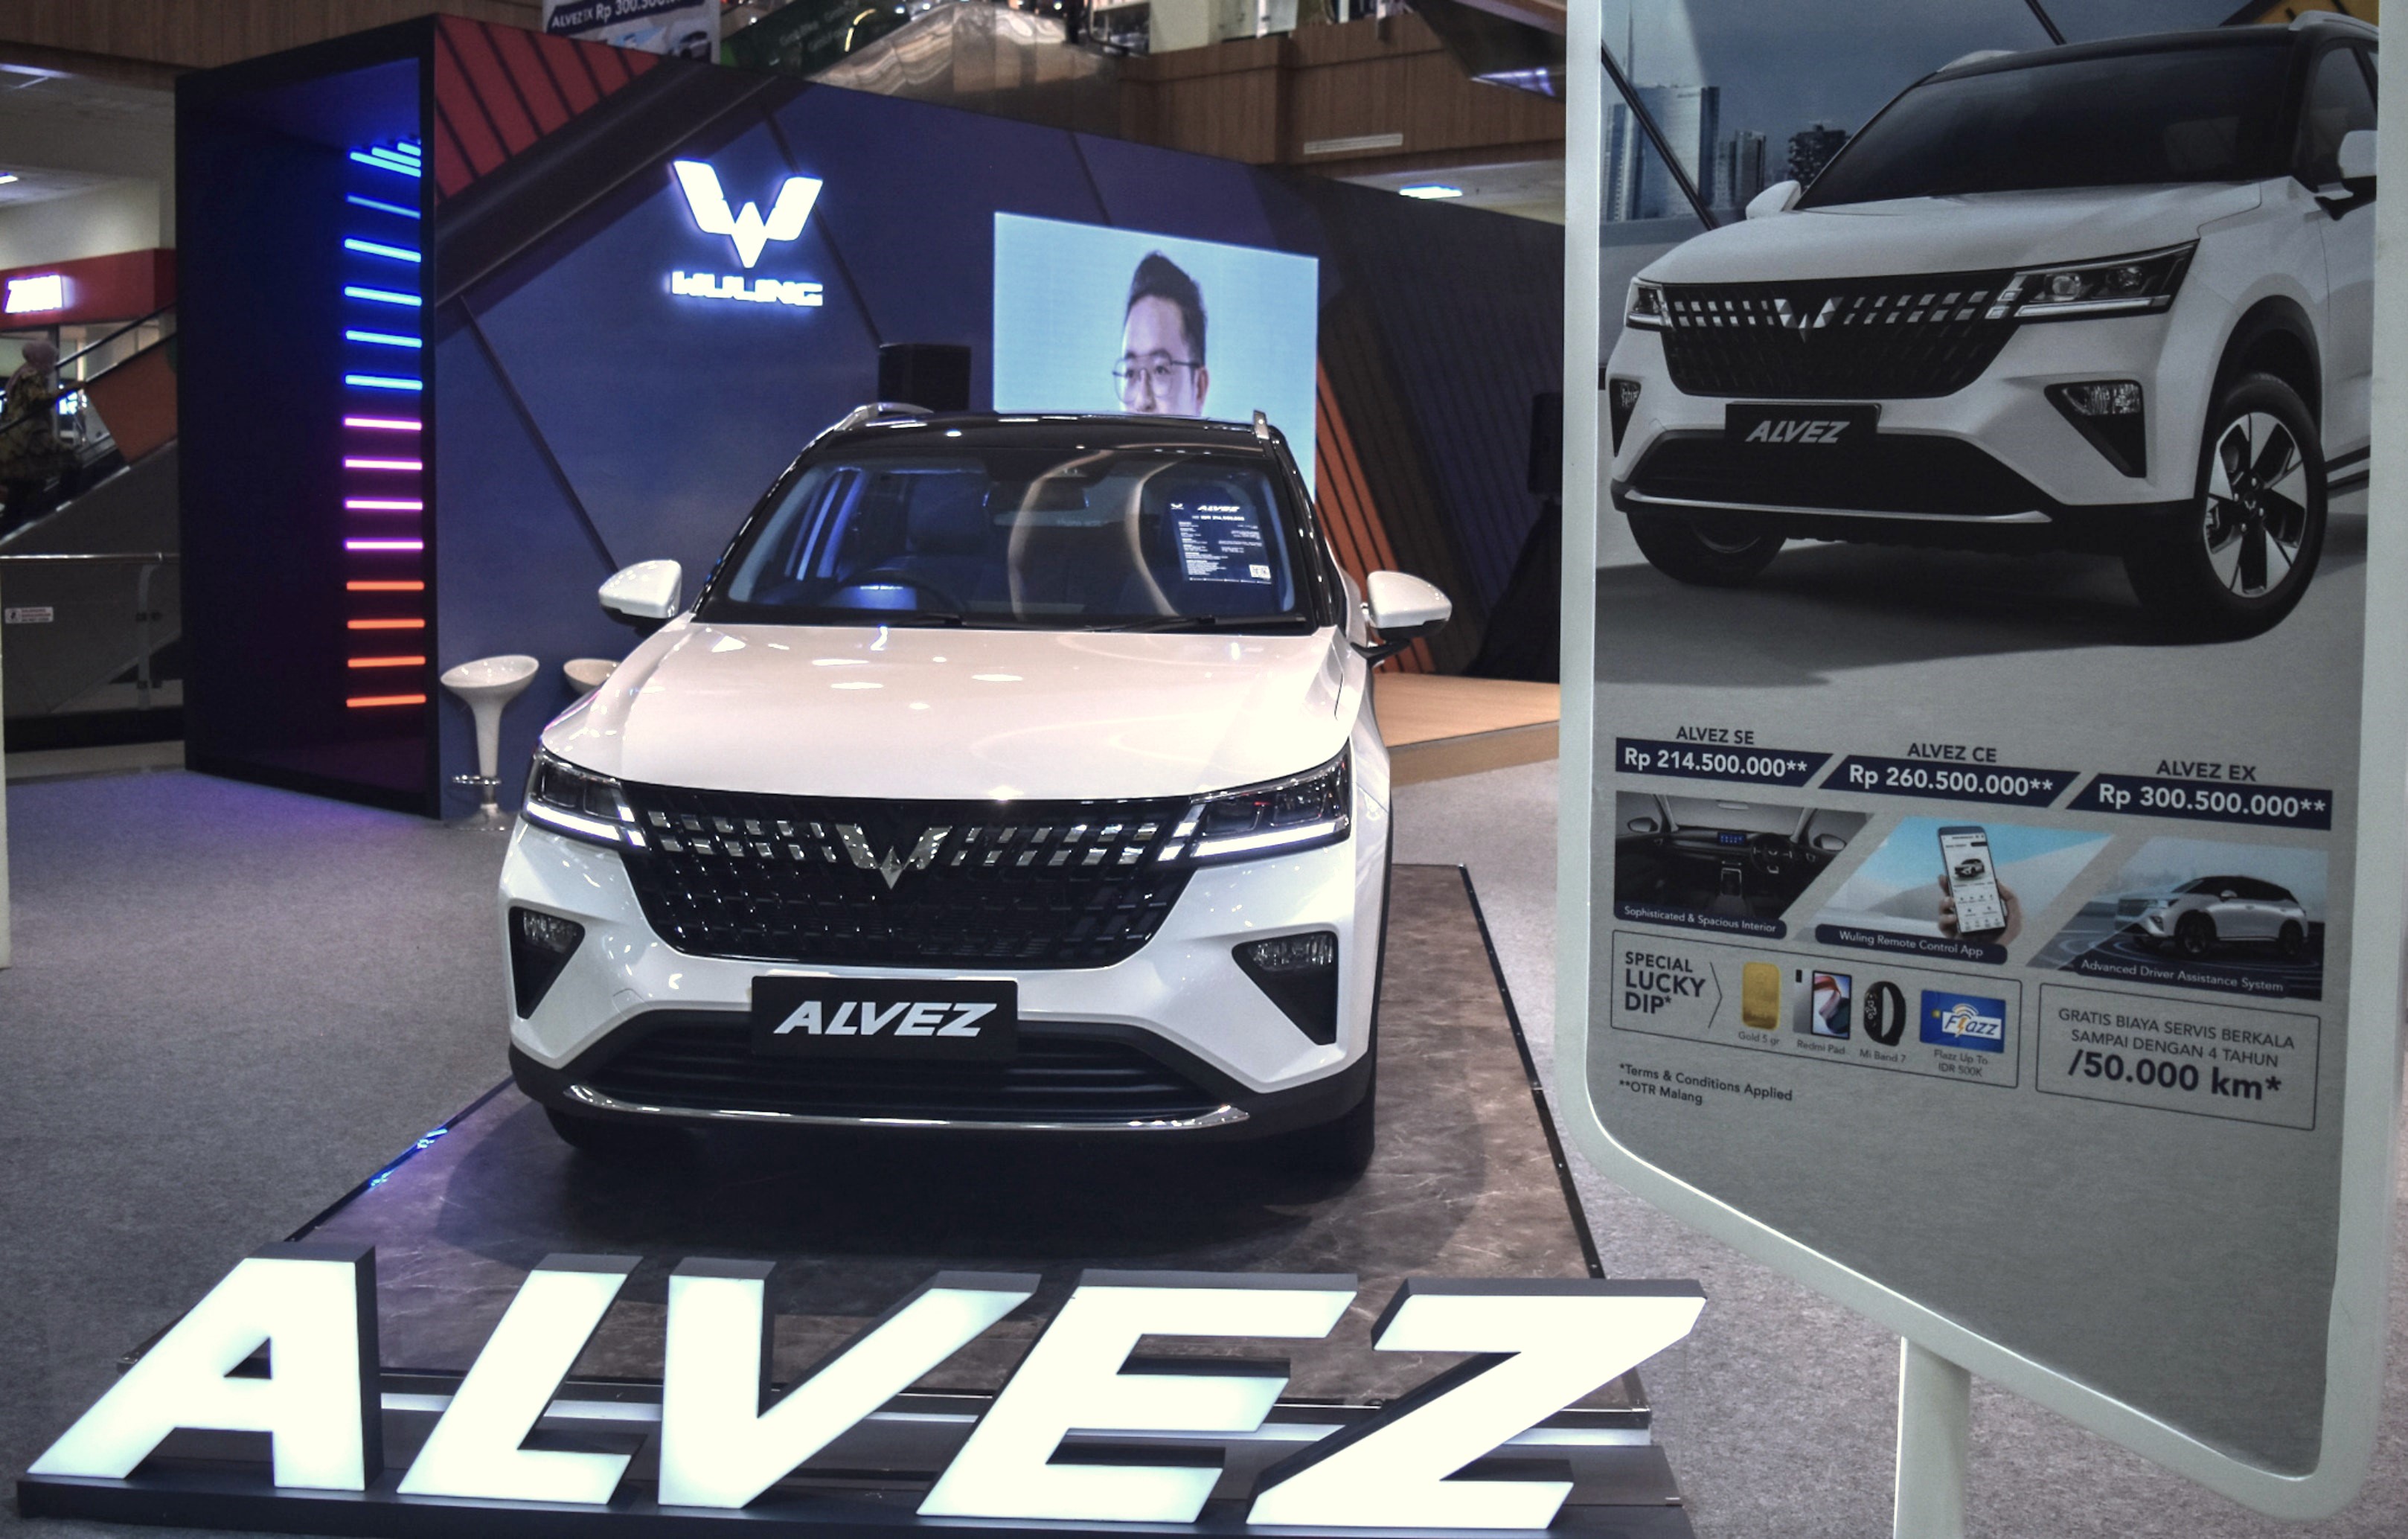 Image Alvez, the Latest Compact SUV from Wuling Greets the People of Malang City